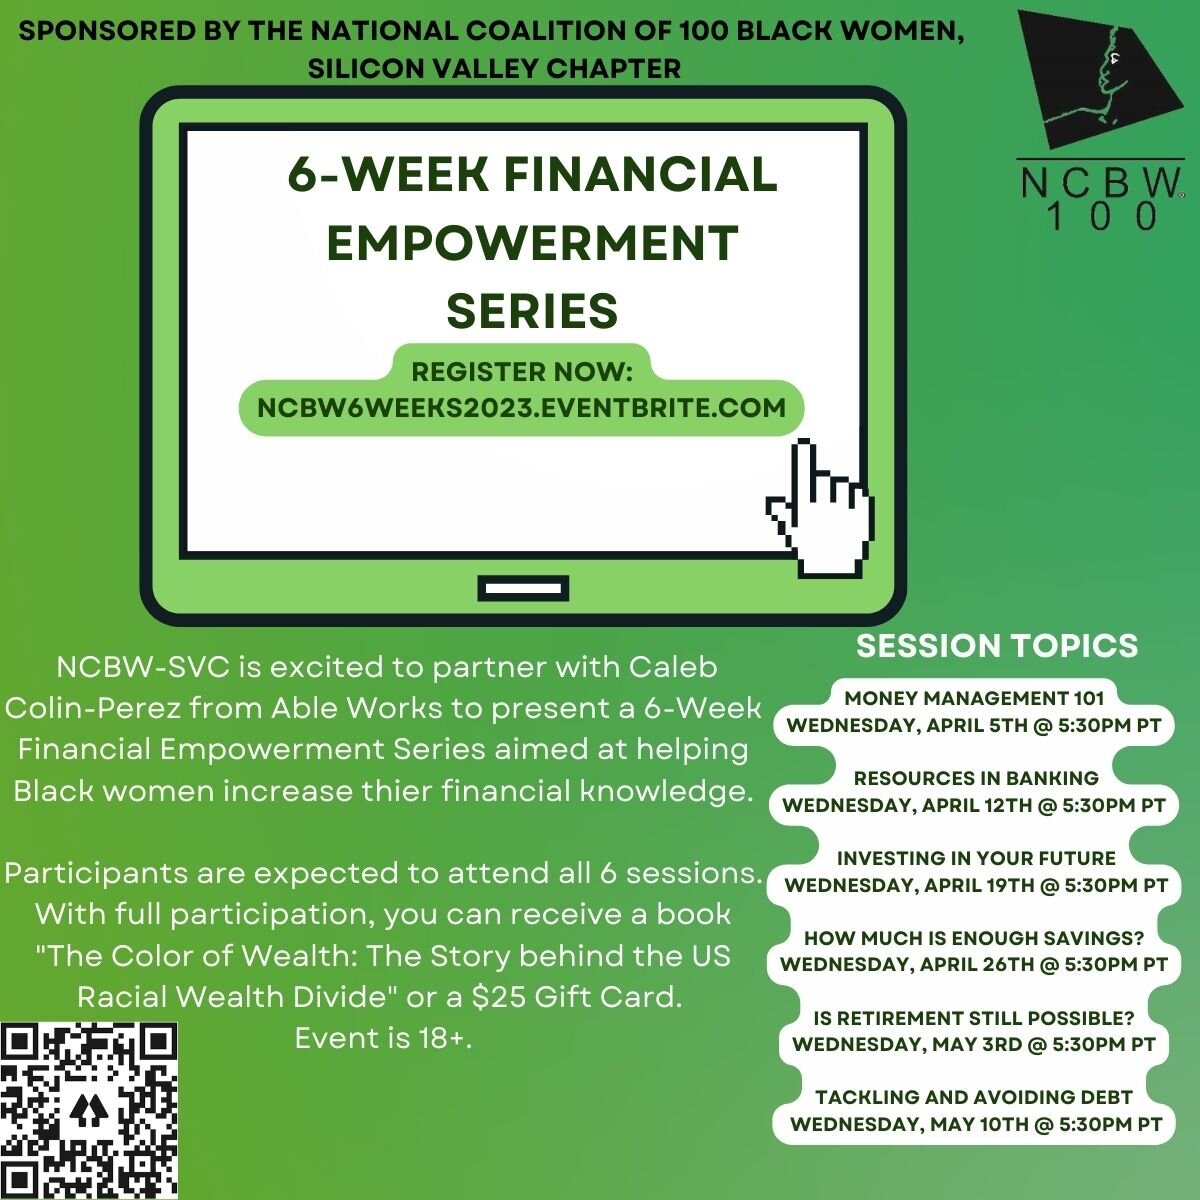 NCBW-SVC is excited to partner with Caleb Colin-Perez from Able Works to present a 6-Week Financial Empowerment Series aimed at helping Black women increase their financial knowledge.

Participants are expected to attend all 6 sessions. With full par